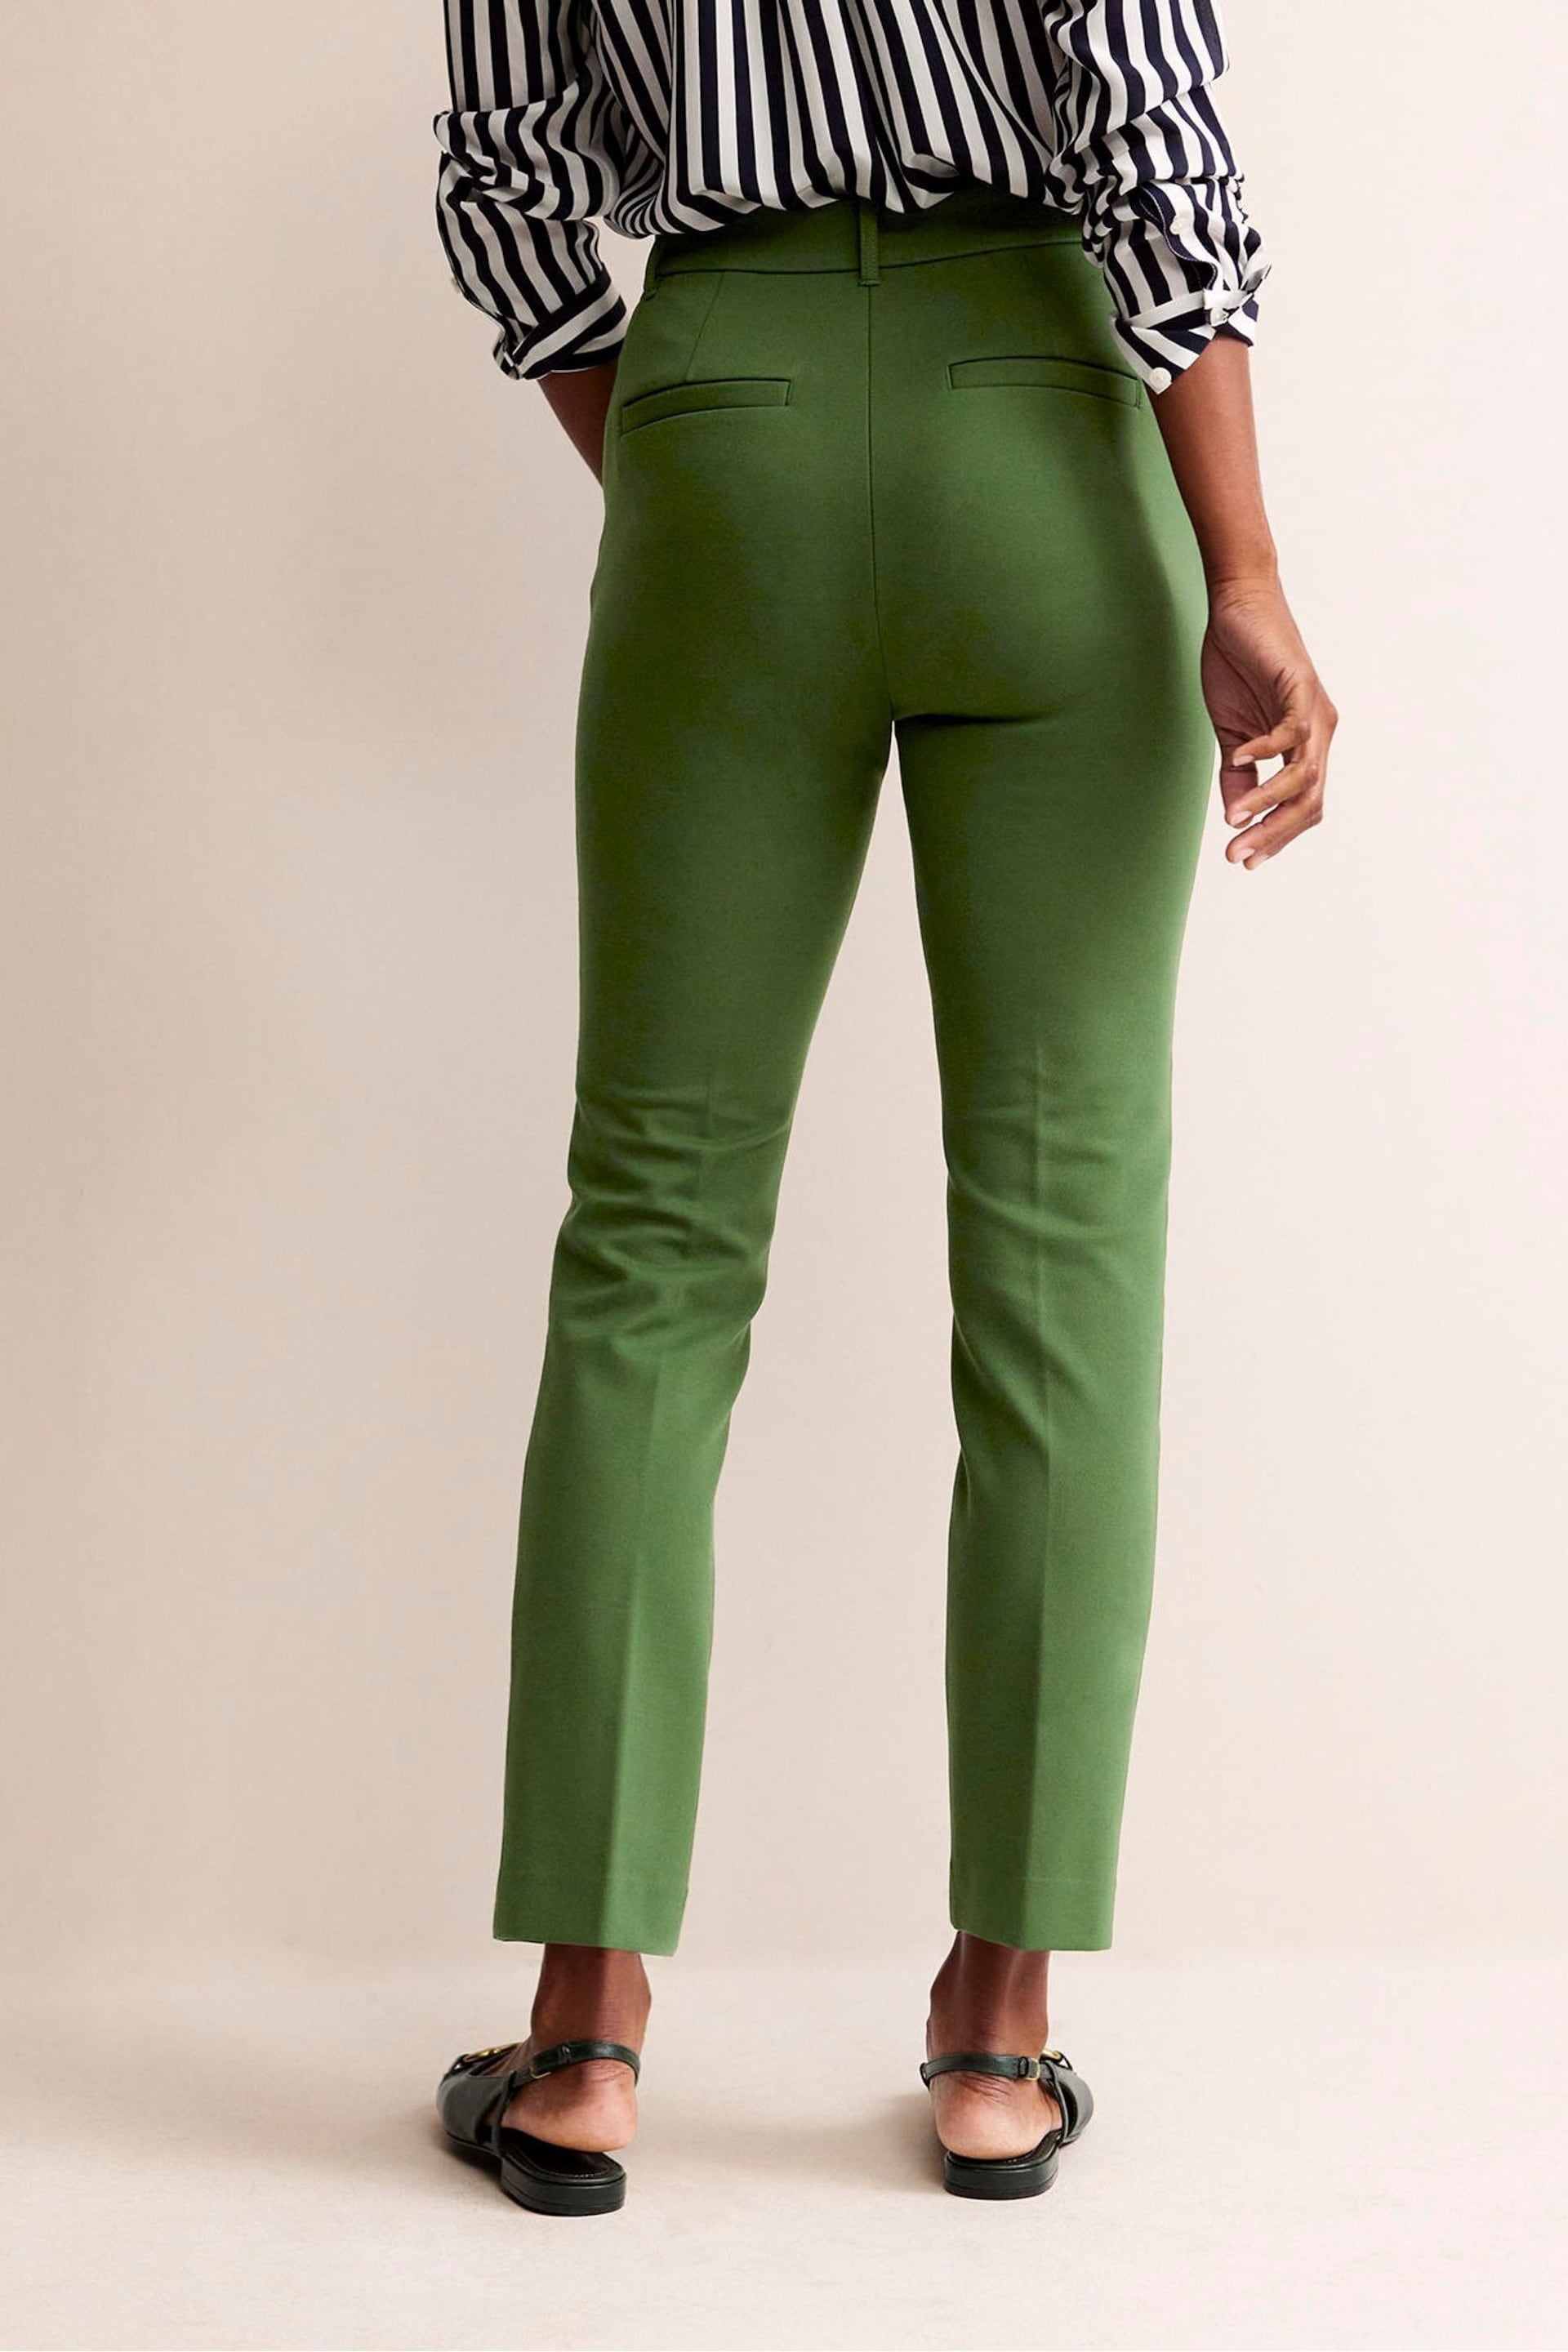 Boden Green Highgate Ponte Trousers - Image 4 of 5